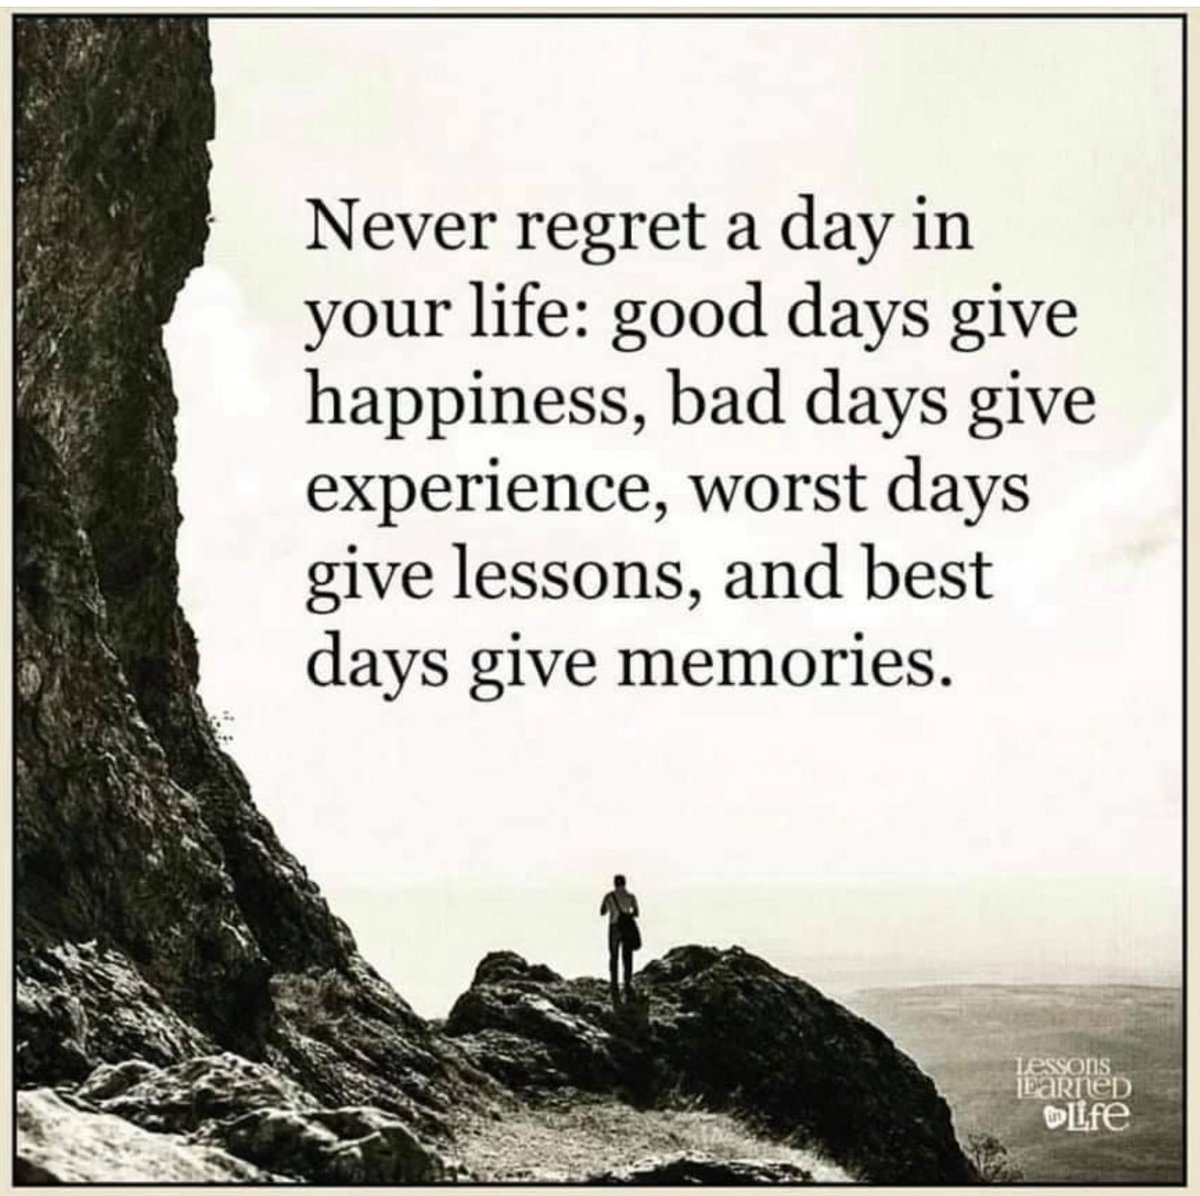 “Never regret a day” #quote #quotes #quotestoliveby #quotestoinspire #quotesaboutlife #quoteoftheday #message #realtalk #wordsandsayings #quotesdaily #lifequotes #sayings #quotable #instaquote #quotestagram #life #motivation #mindfulness #inspiration #truth